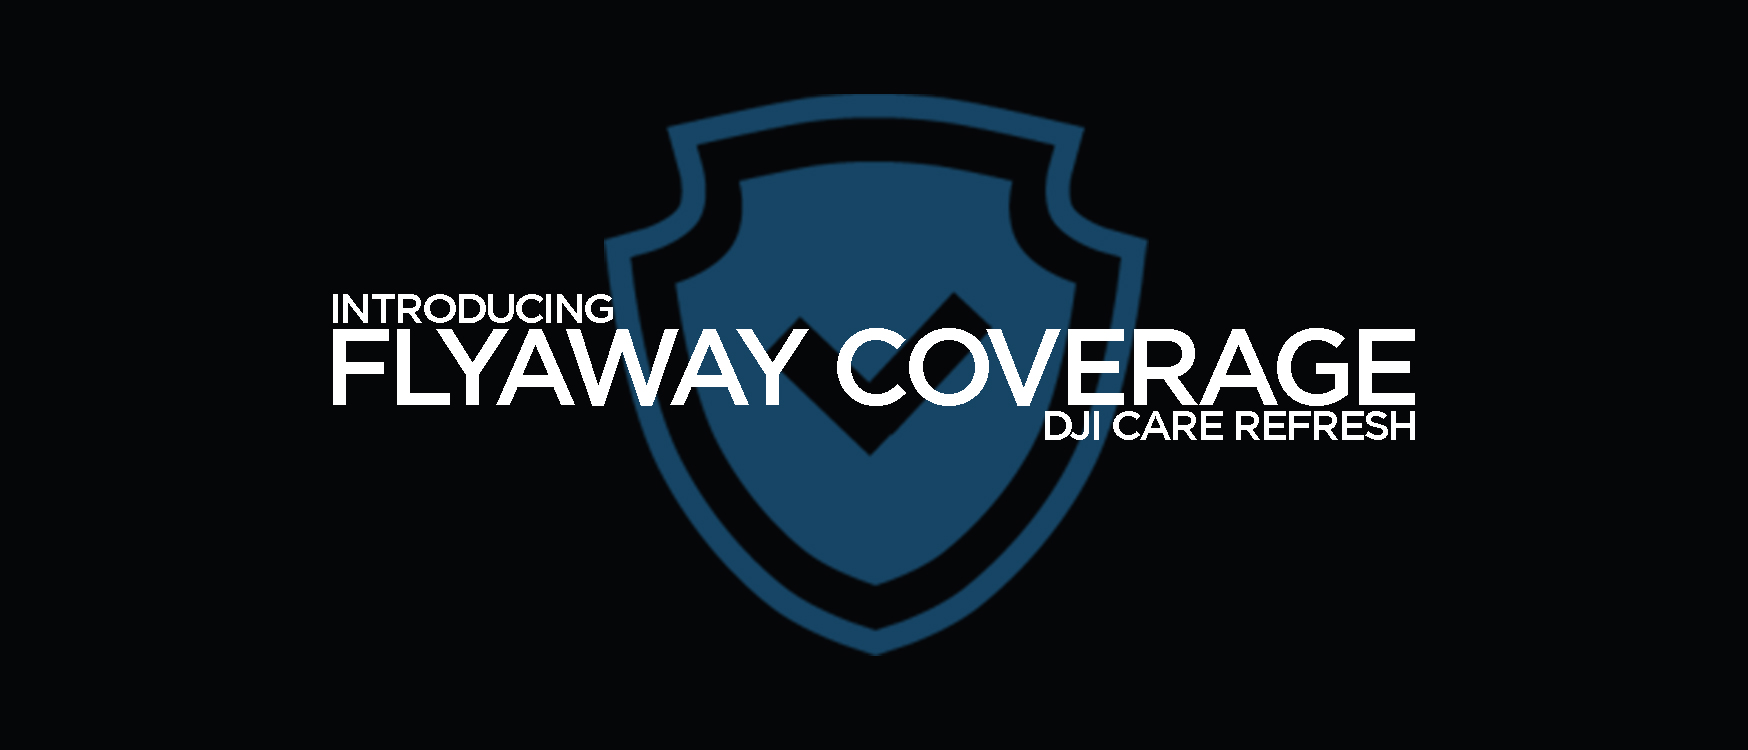 Introducing Flyaway Coverage for DJI Care Refresh 